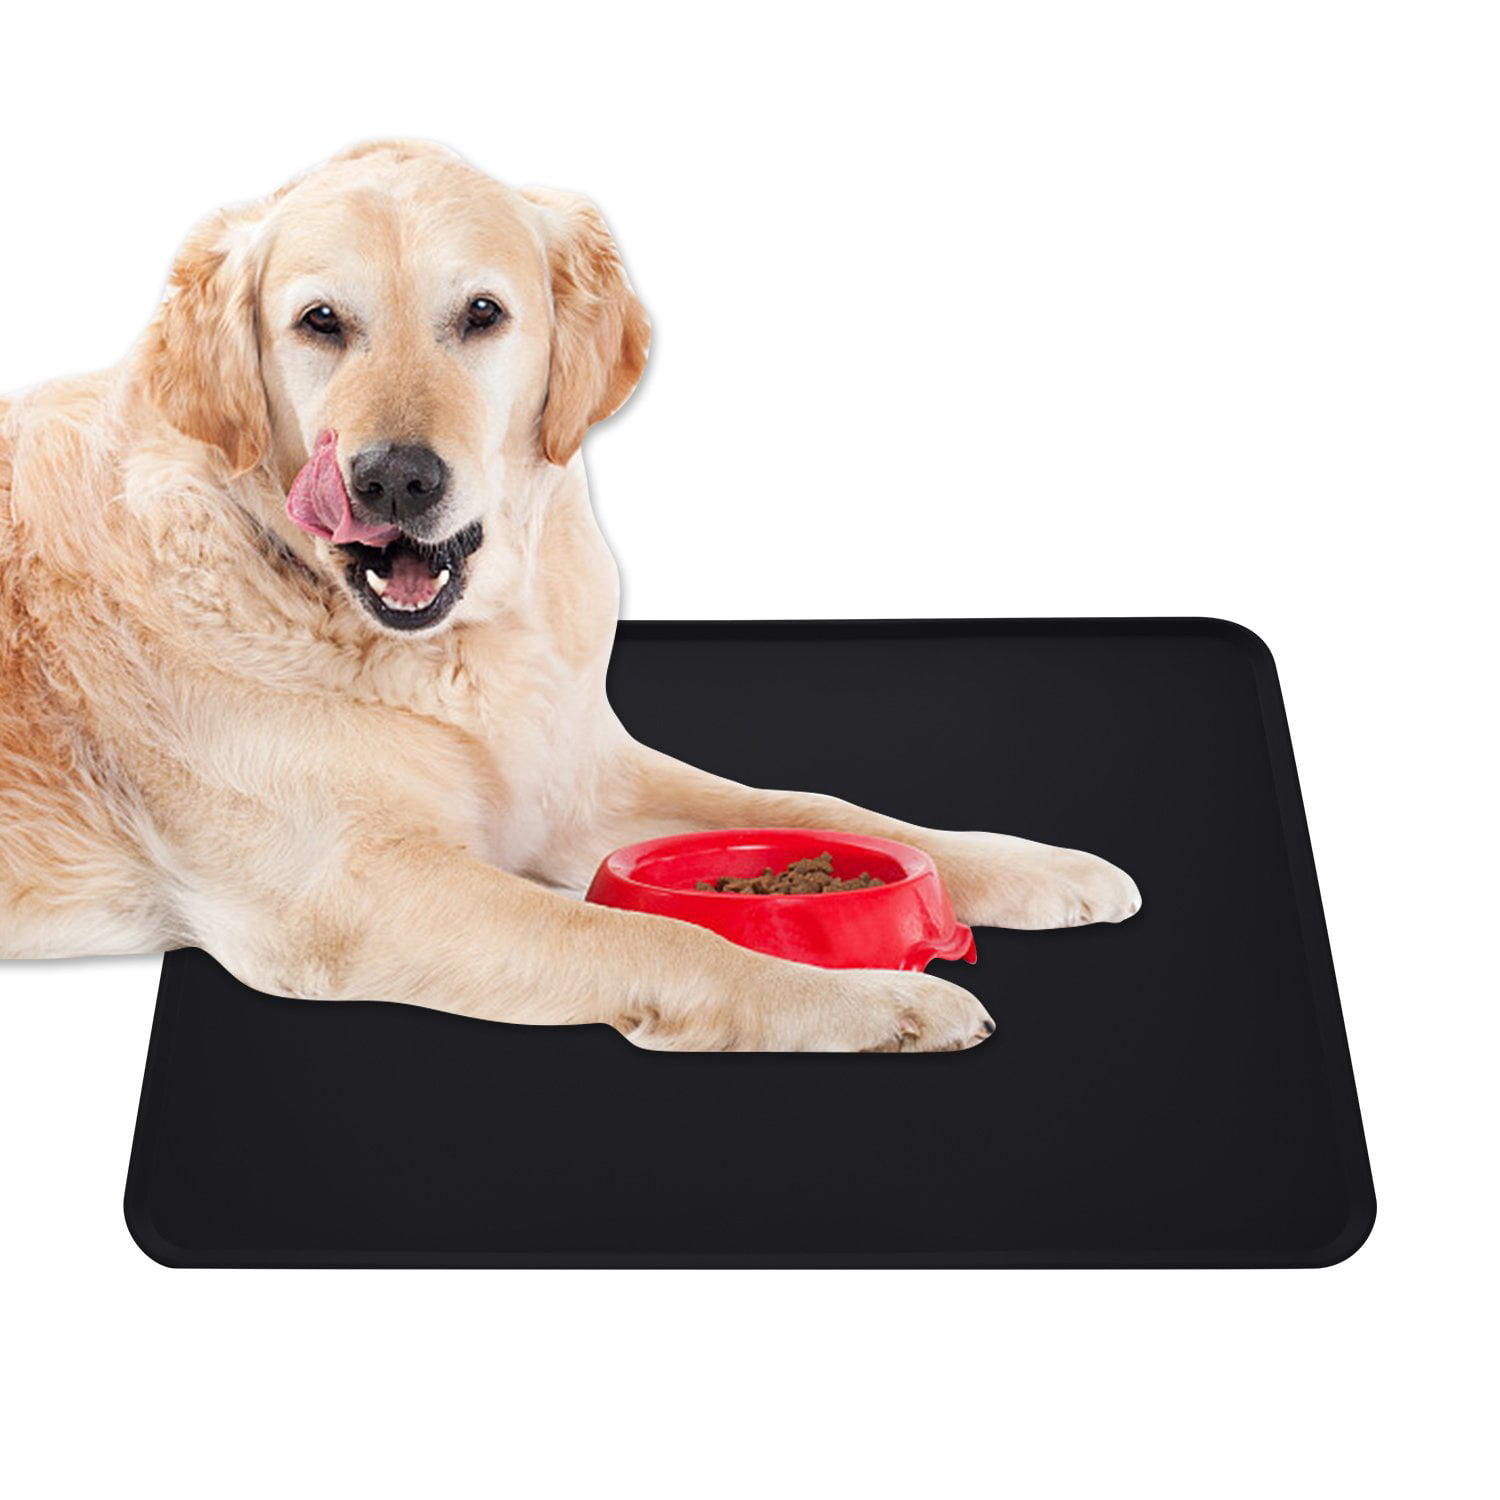 Conlun Silicone Dog Food Mat Waterproof Rubber Pet Feeding Mat for Dog and Cat Anti-Slip Dog Cat Bowl Mat with Raised Edge Avoid Water or Food Spillin